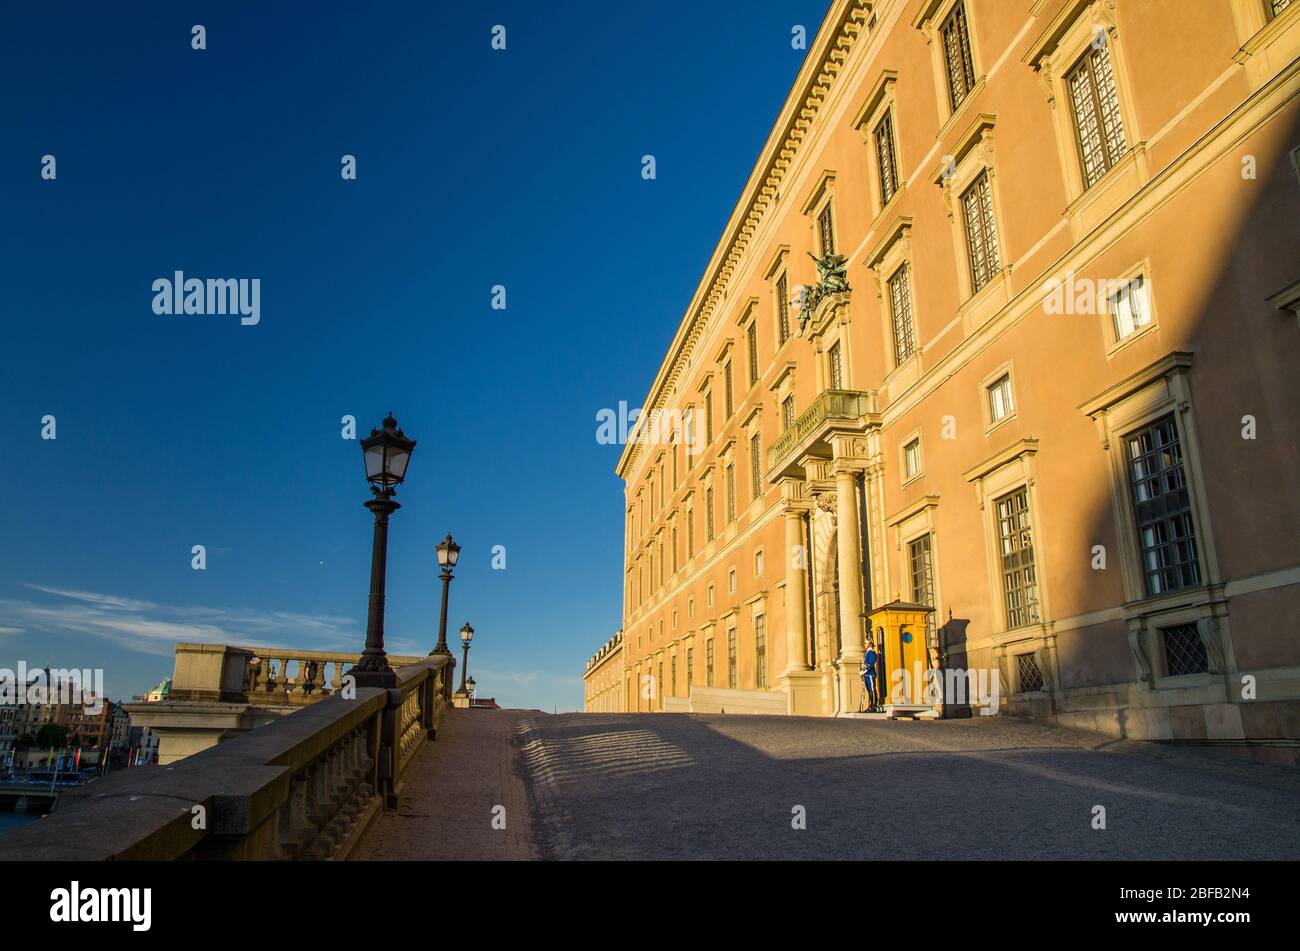 Sweden, Stockholm, May 30, 2018: Guard soldier at post near central enter Royal Palace northern facade Kungliga slottet in historical centre Gamla Sta Stock Photo